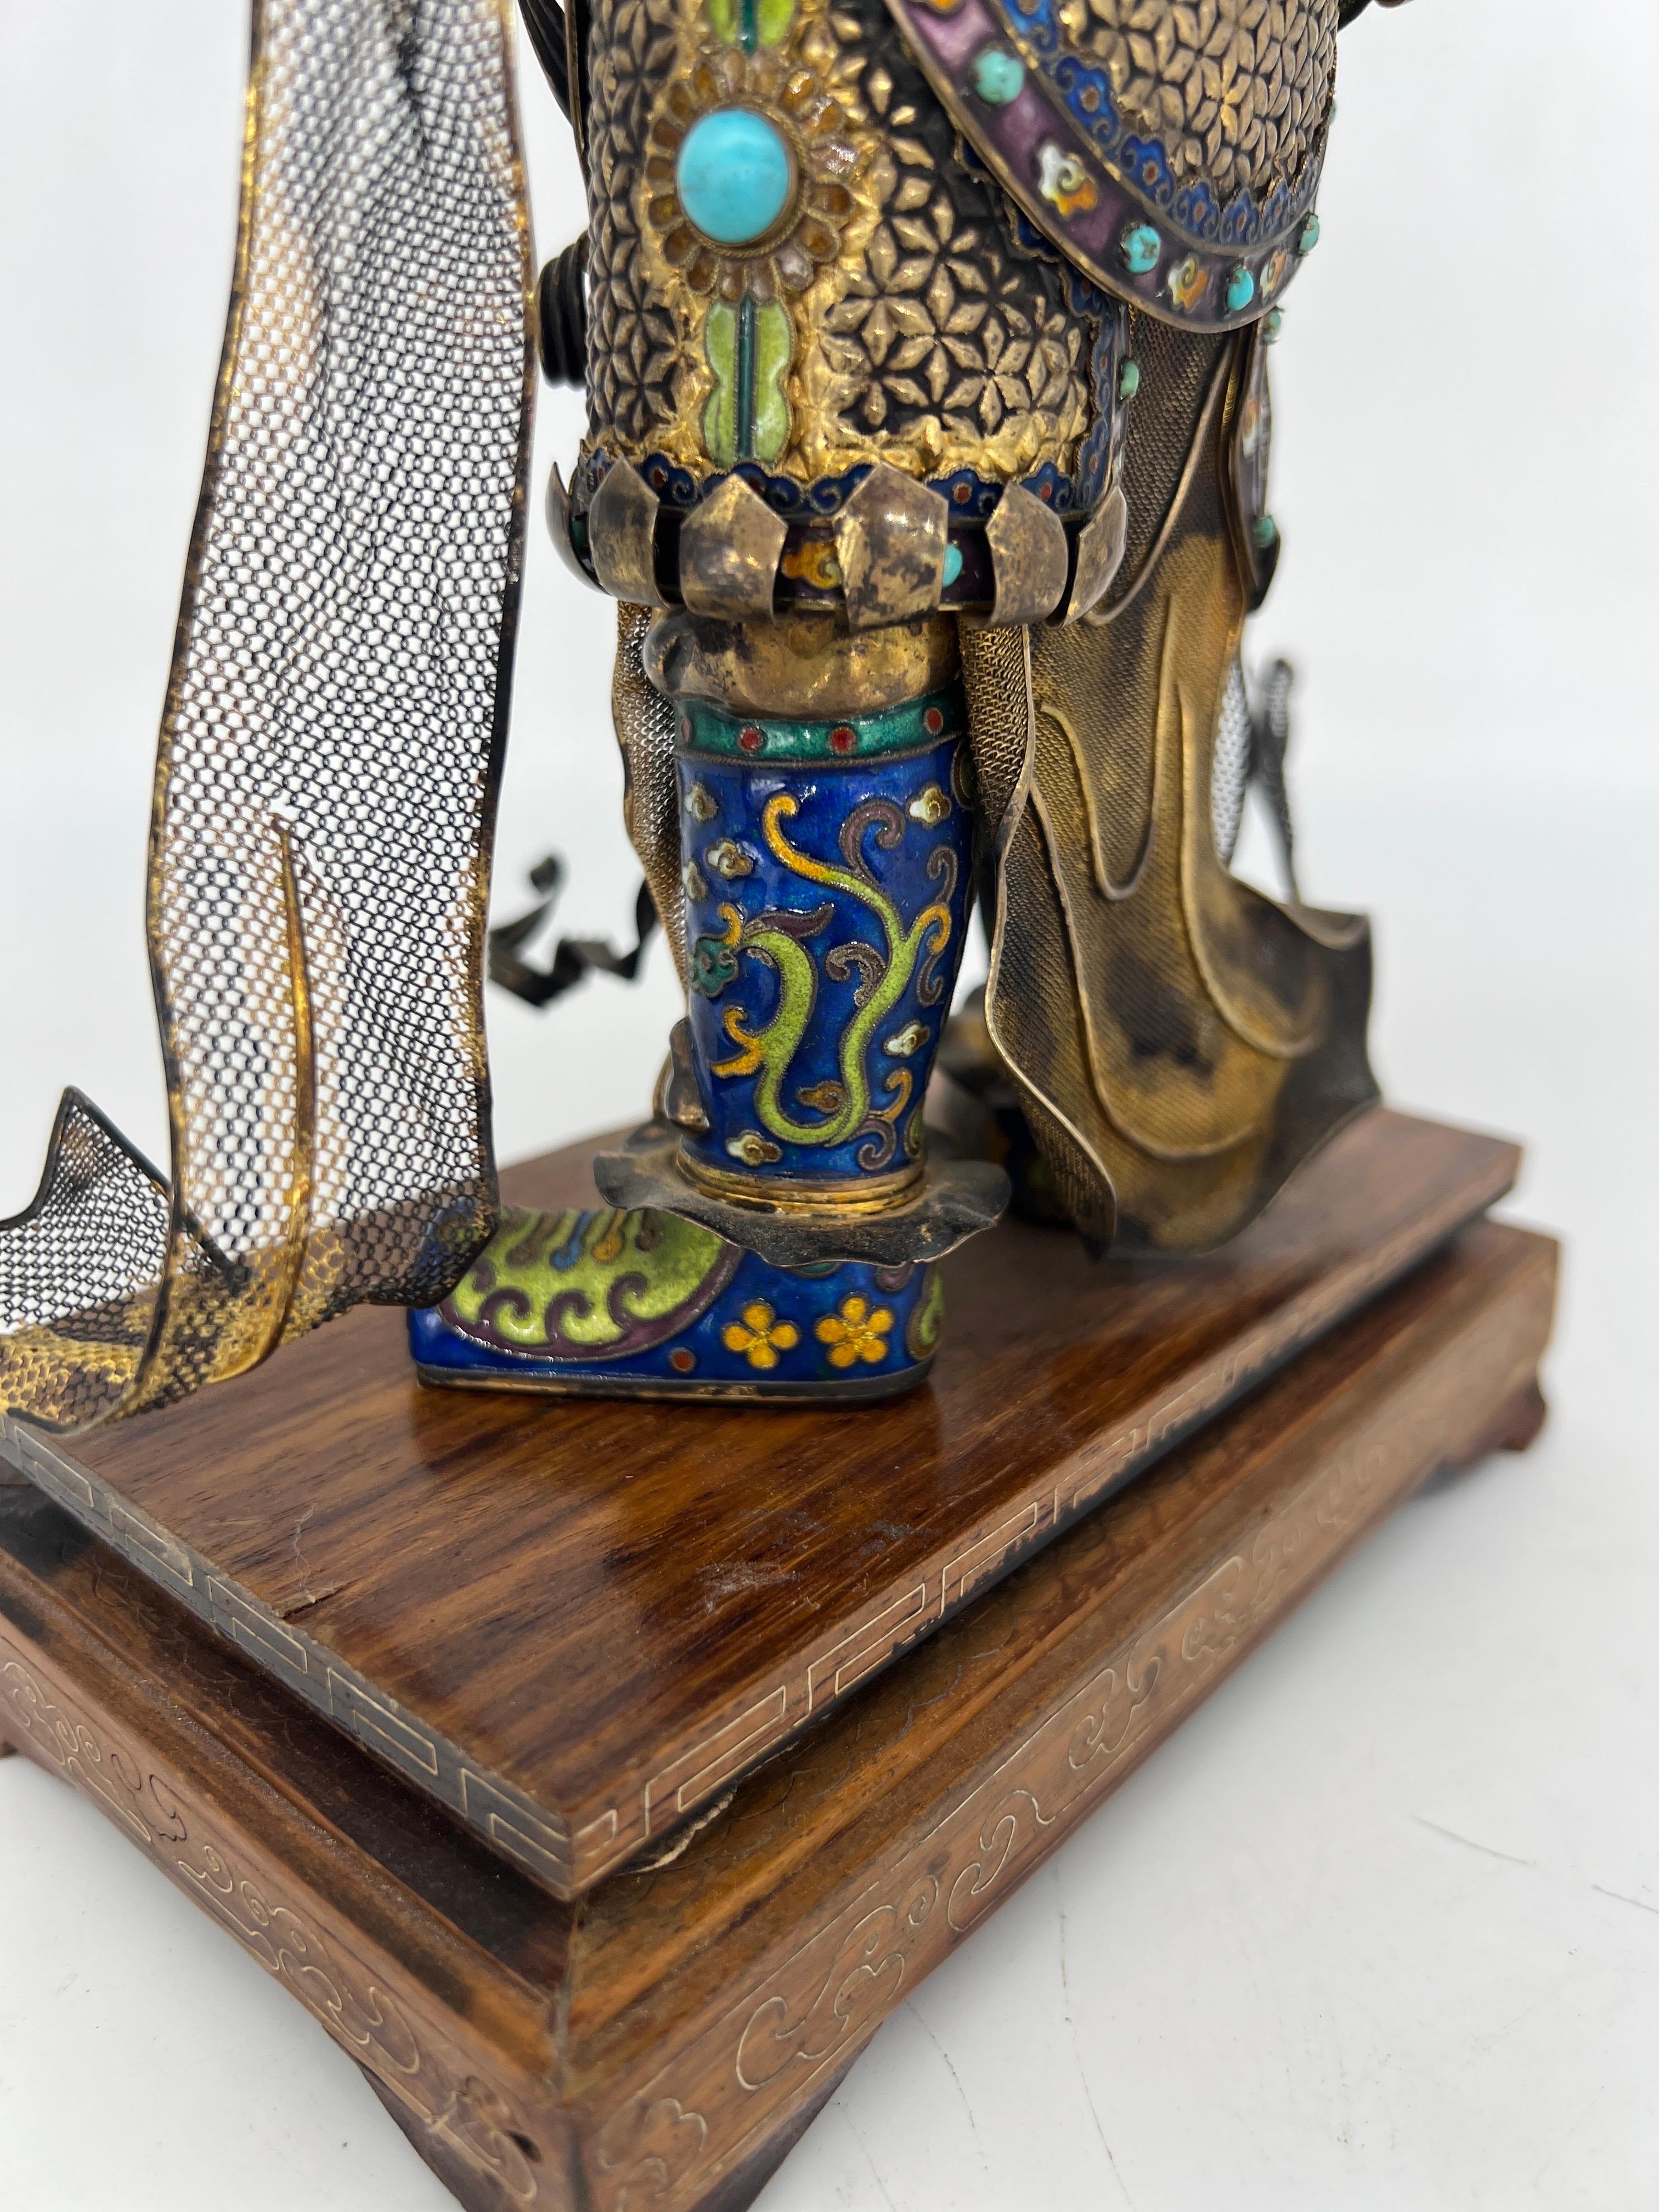 Antique Chinese Silver Gilt, Enamel & Turquoise Mounted Immortal Figurine For Sale 7